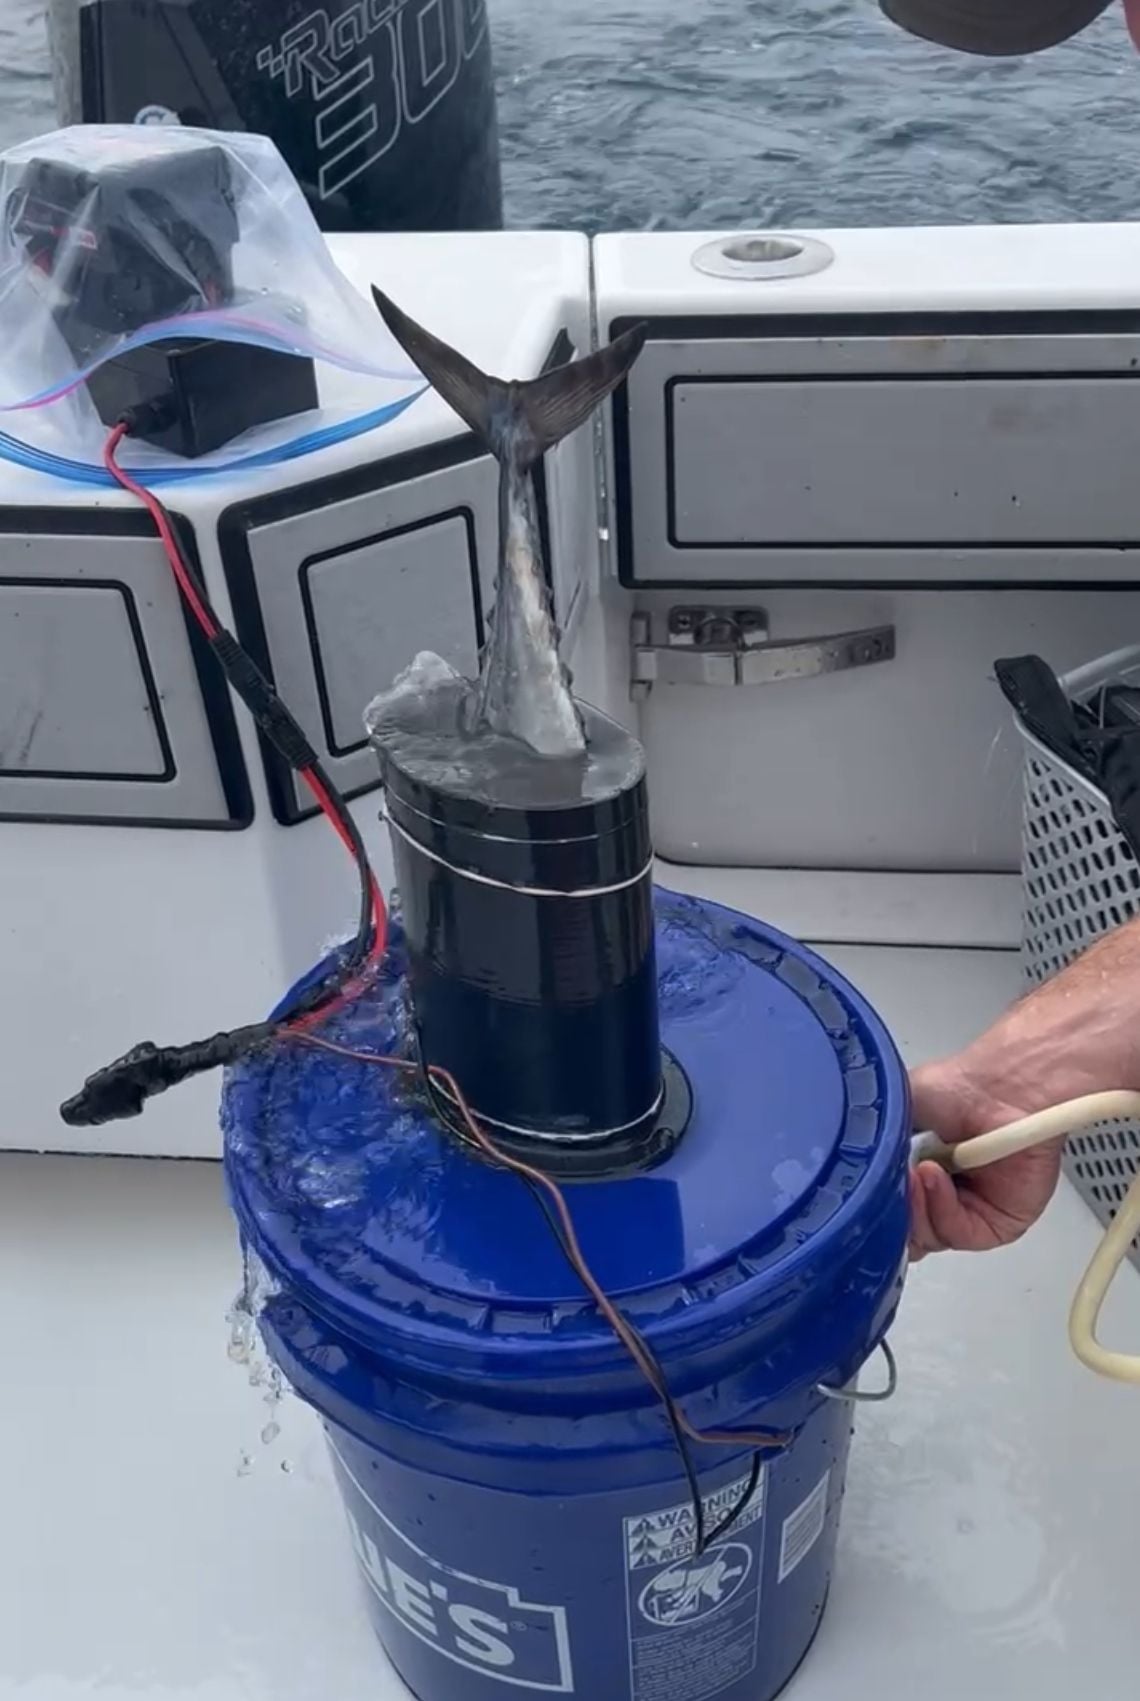 3d printed tuna tubes. - The Hull Truth - Boating and Fishing Forum